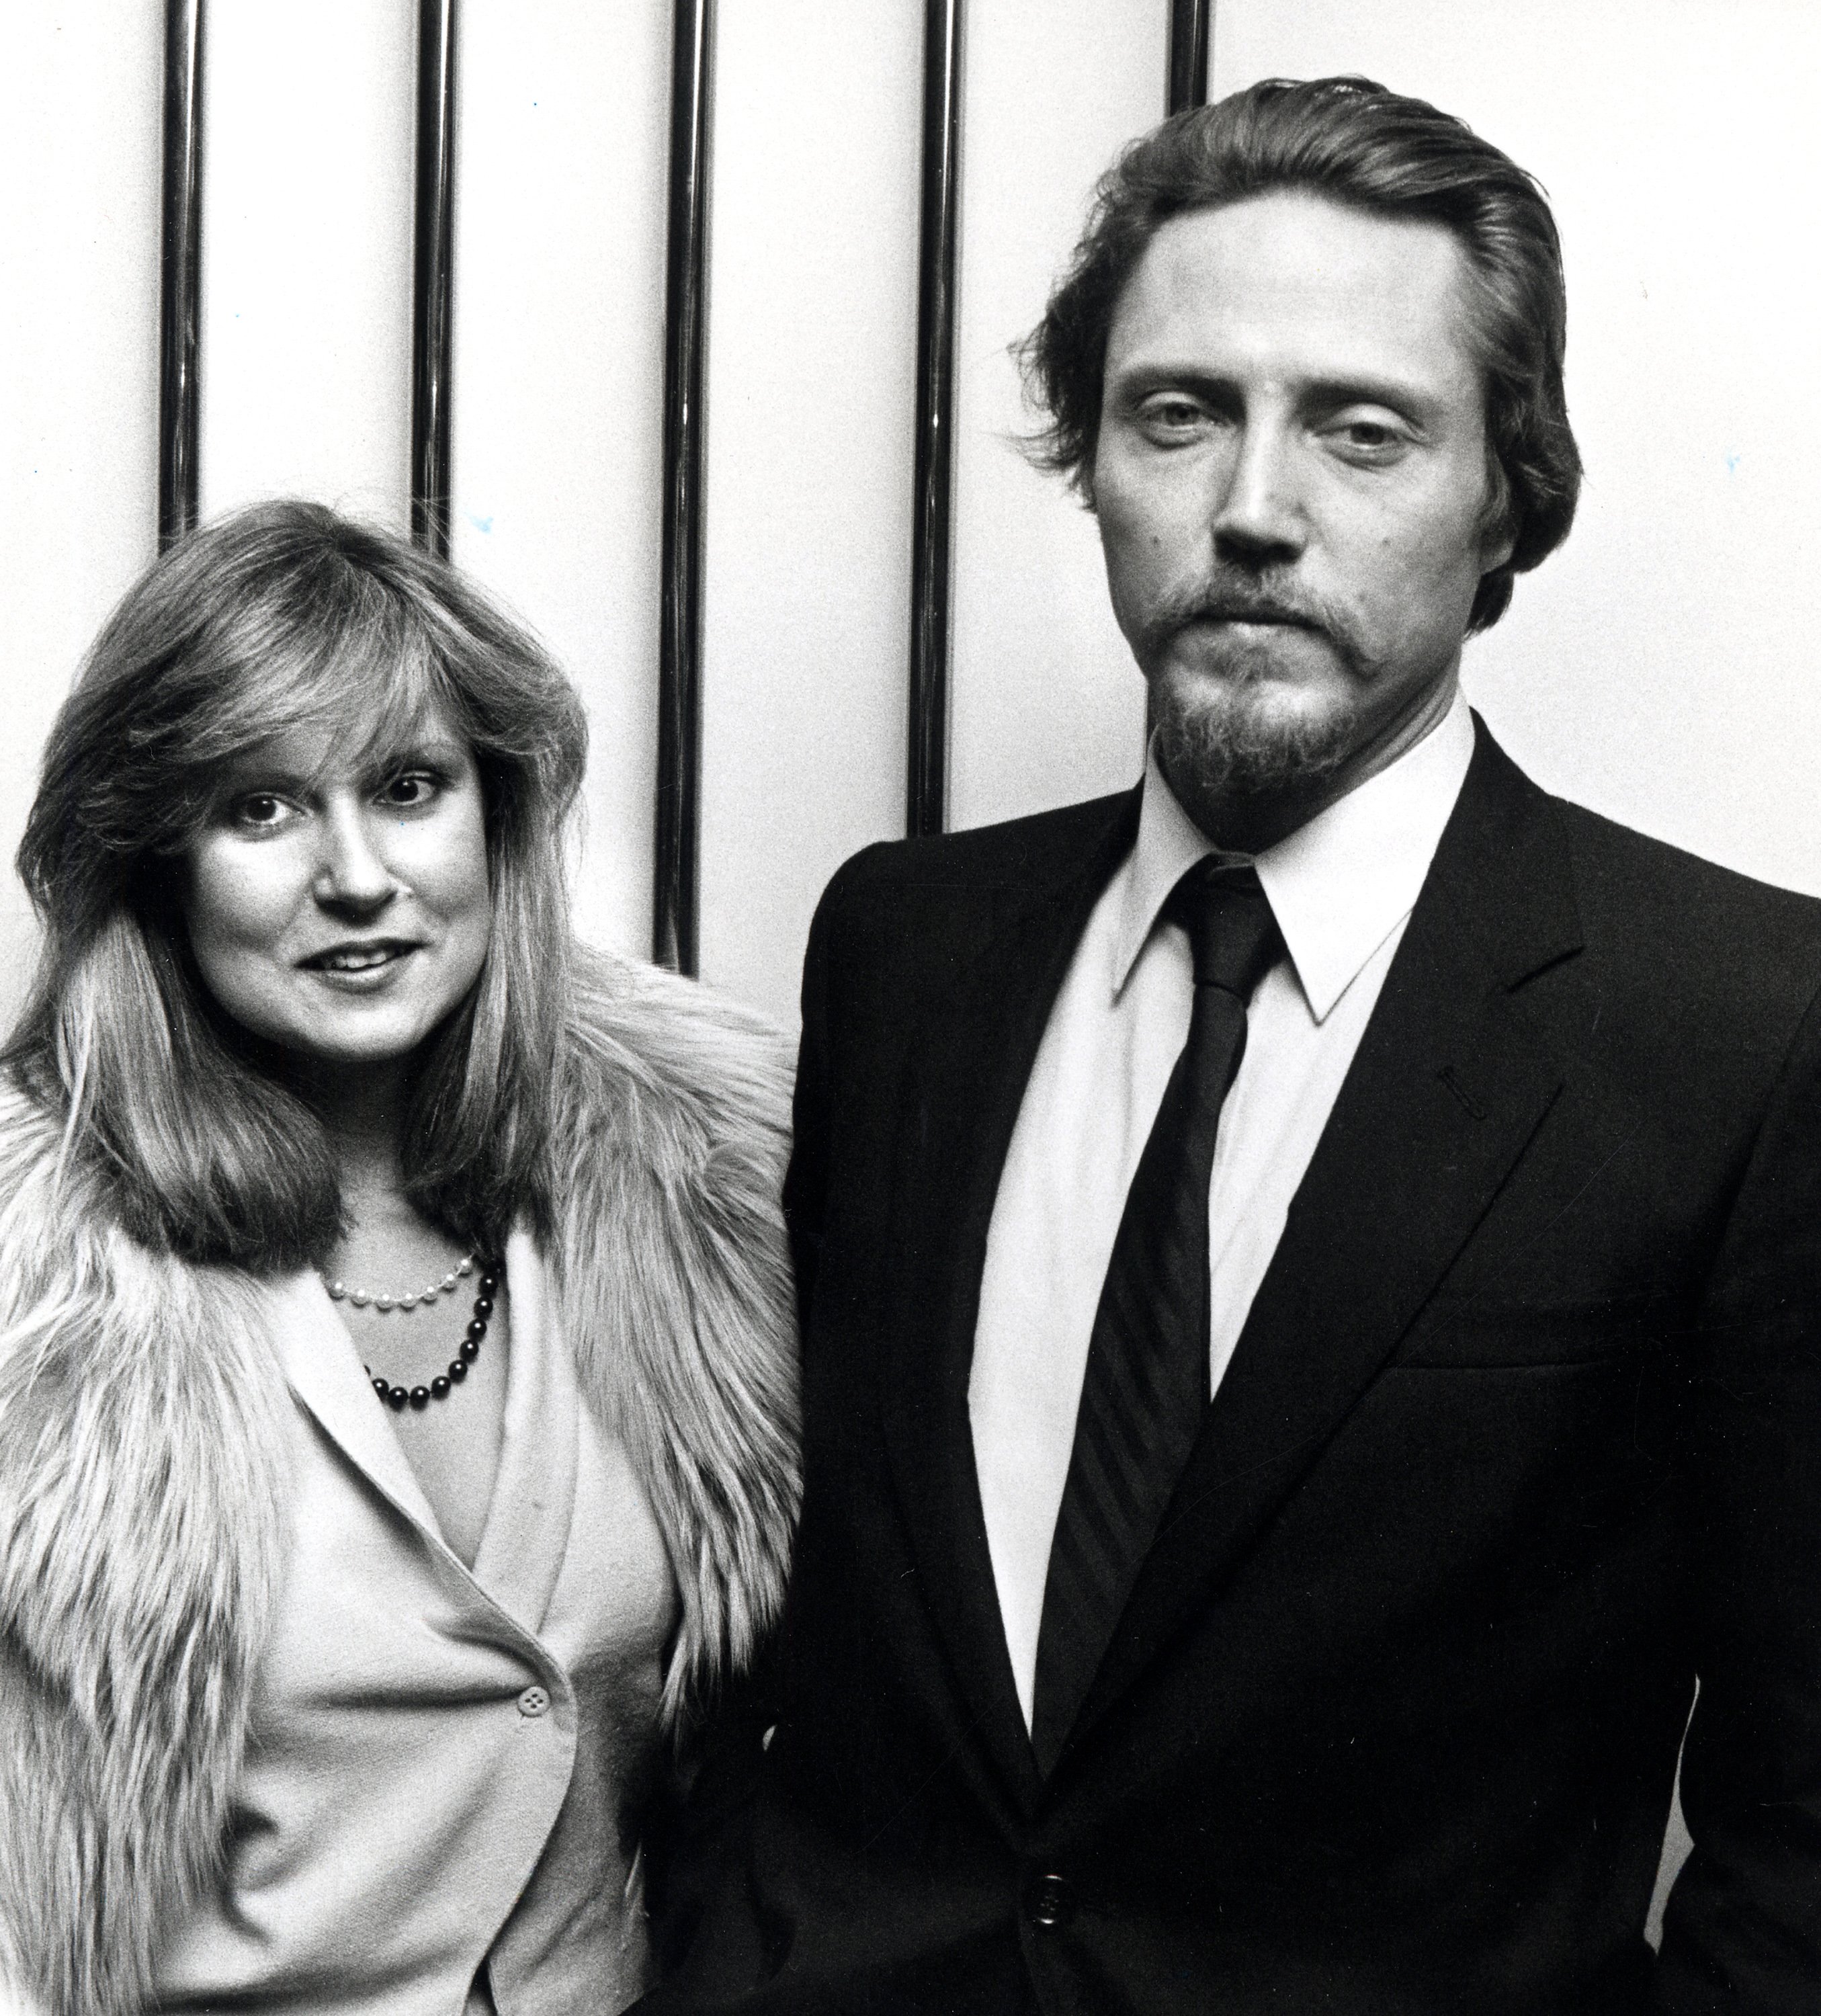 Christopher Walken and Georgianne Walken at the "Heaven's Gate" premiere on November 18, 1980 | Source: Getty Images